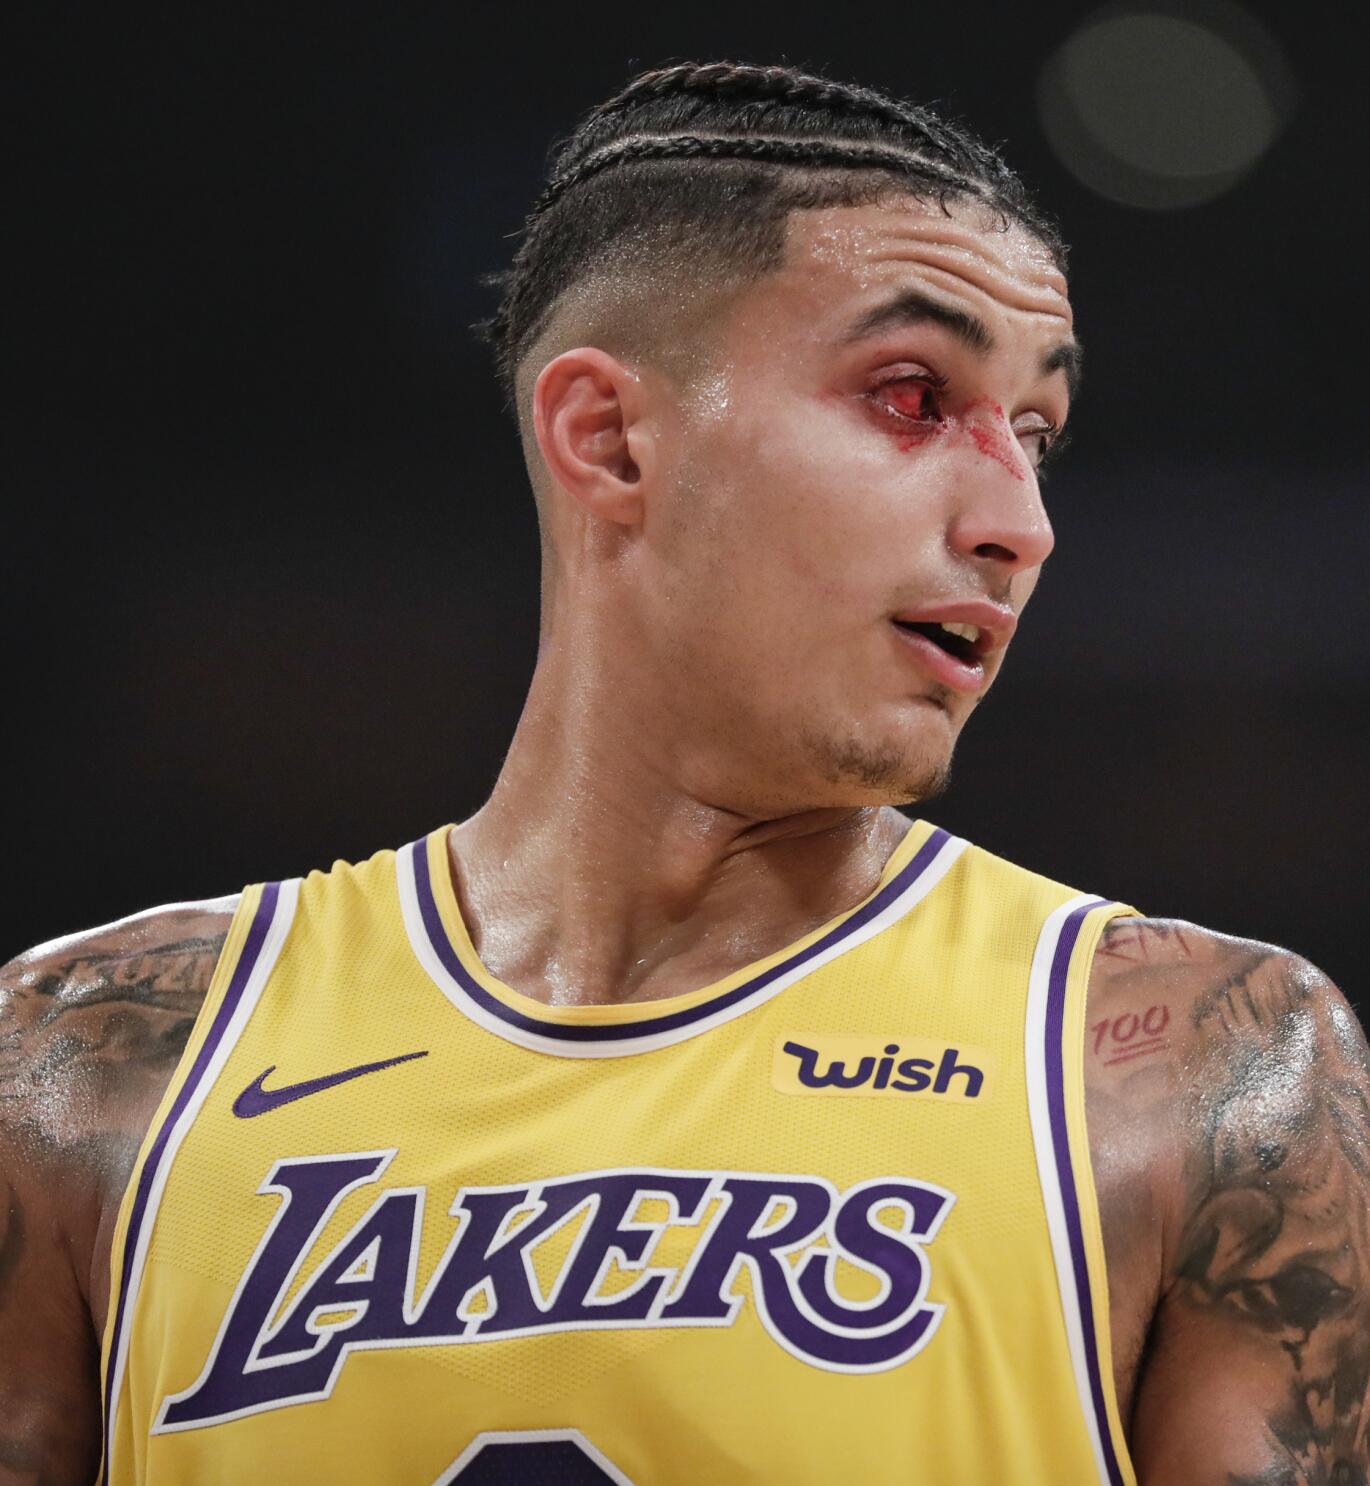 Lakers: Kyle Kuzma compared himself to James Worthy after wearing